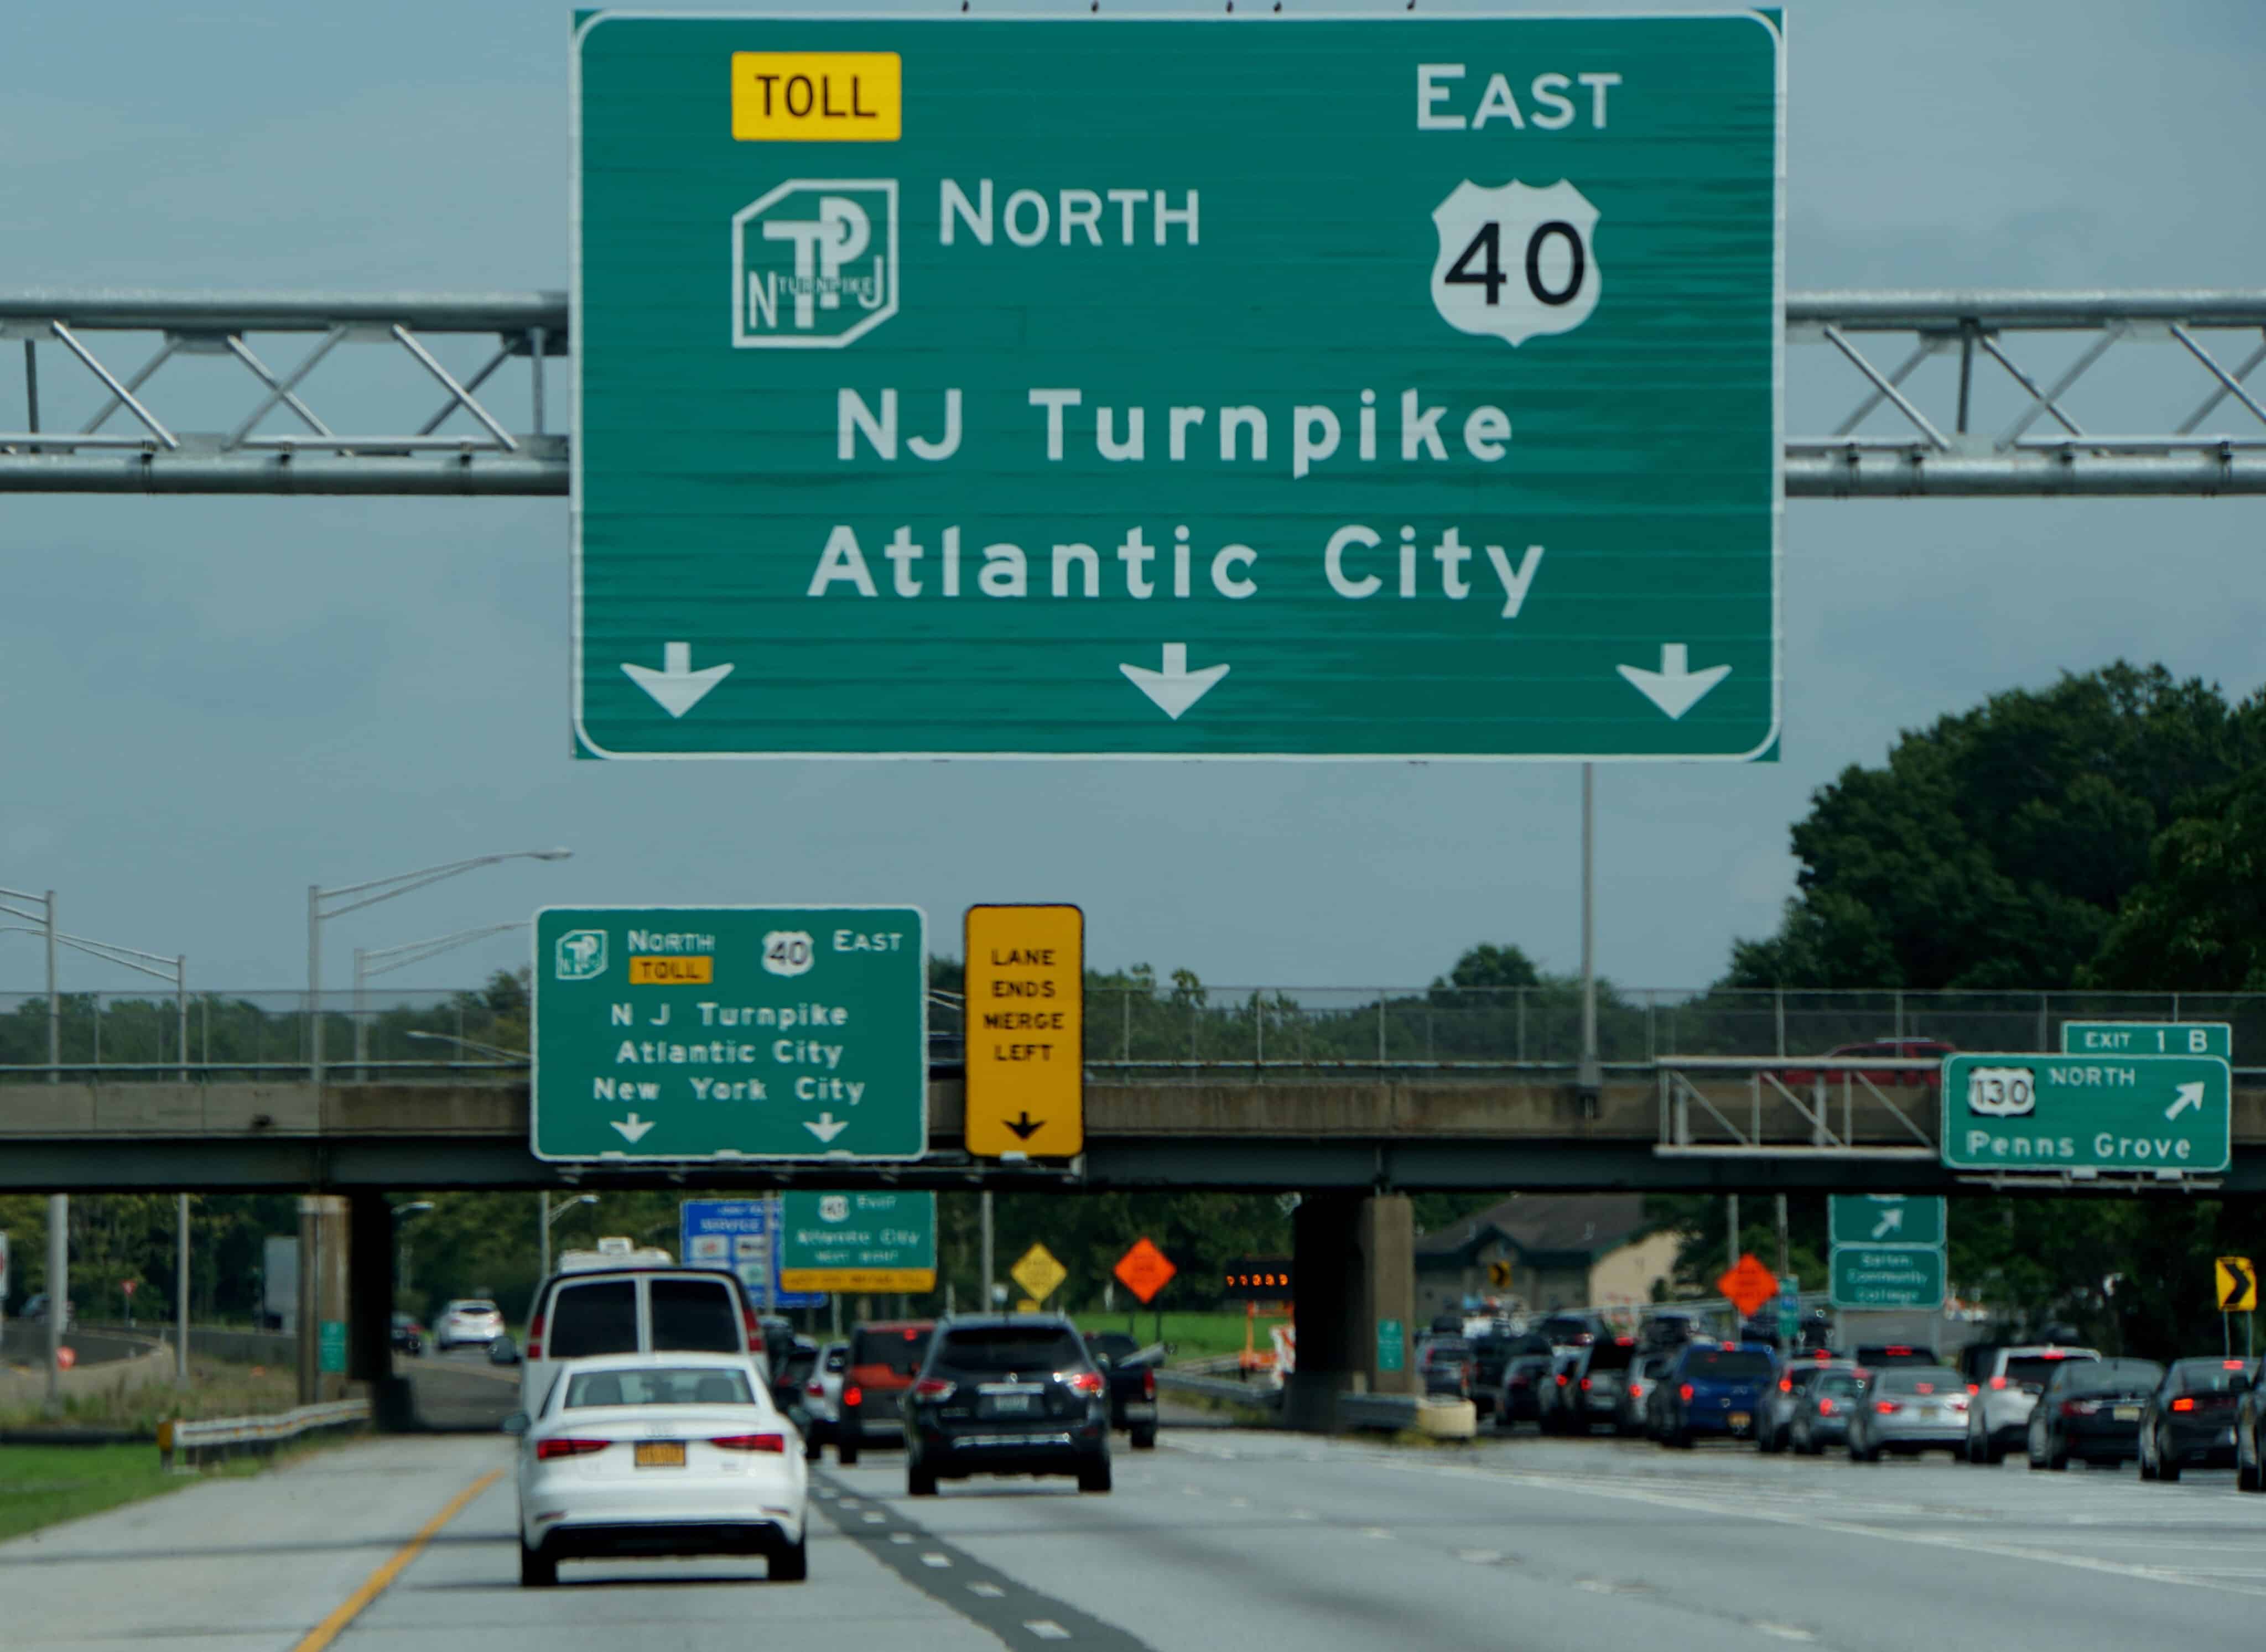 Salem, New Jersey, U.S.A - August 18, 2018 - The view of New Jersey Turnpike in the summer traffic.